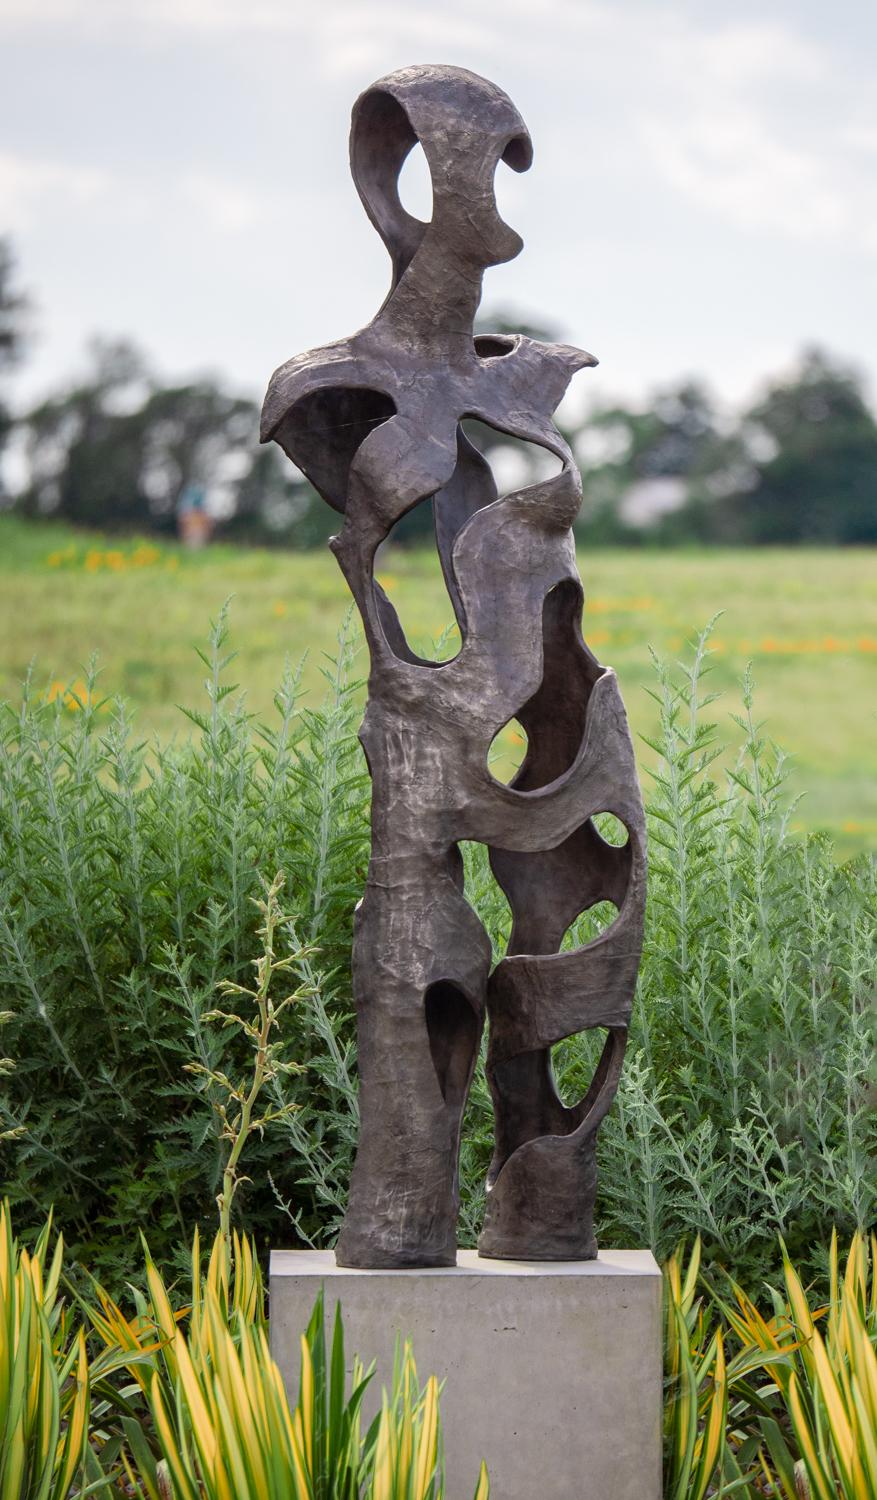 V_N_S Edition 4/9 - tall, abstracted, figurative female bronze outdoor sculpture - Sculpture by David Fisher